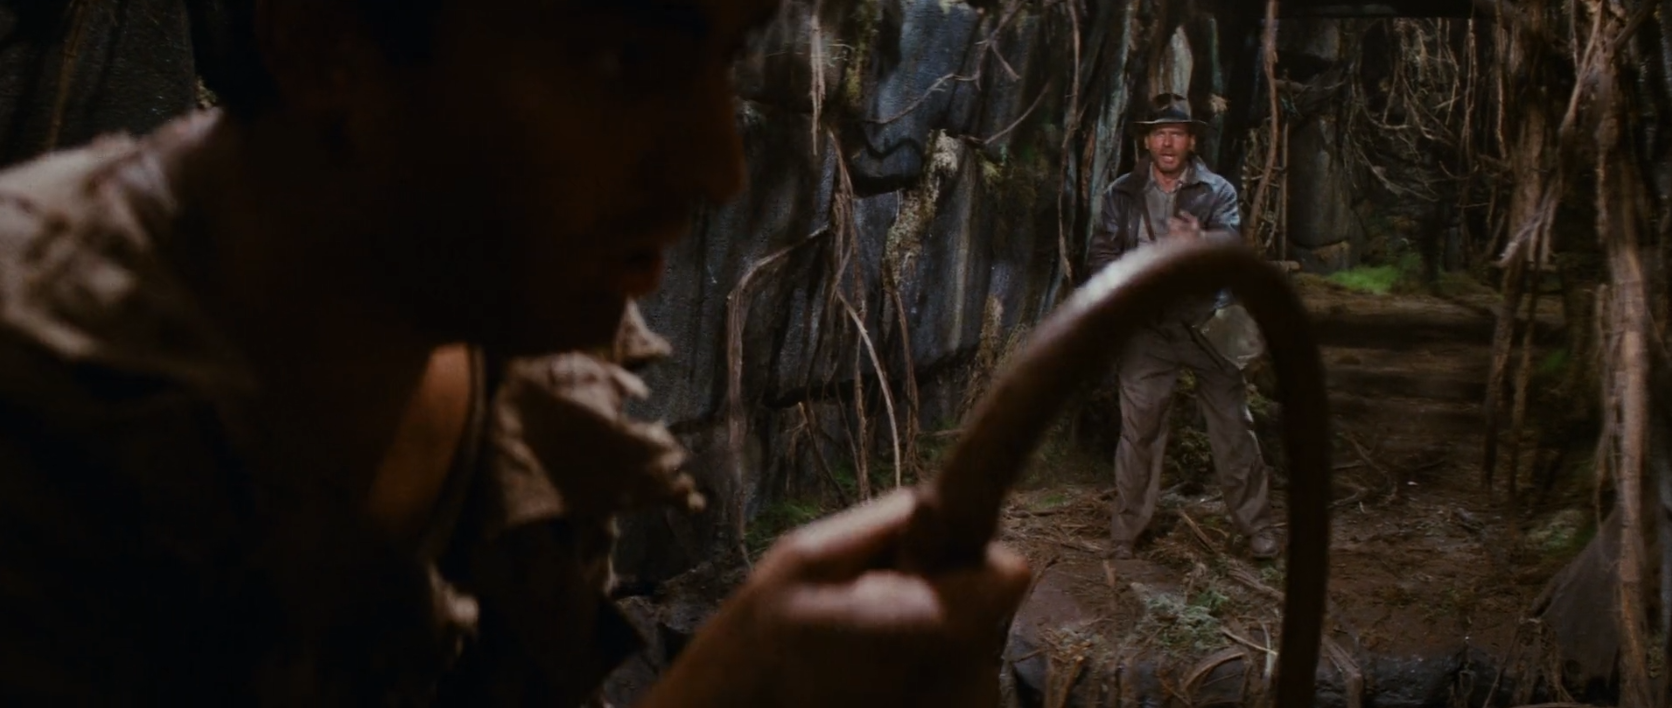 Indiana Jones and the Raiders of the Lost Ark - Satipo takes the whip